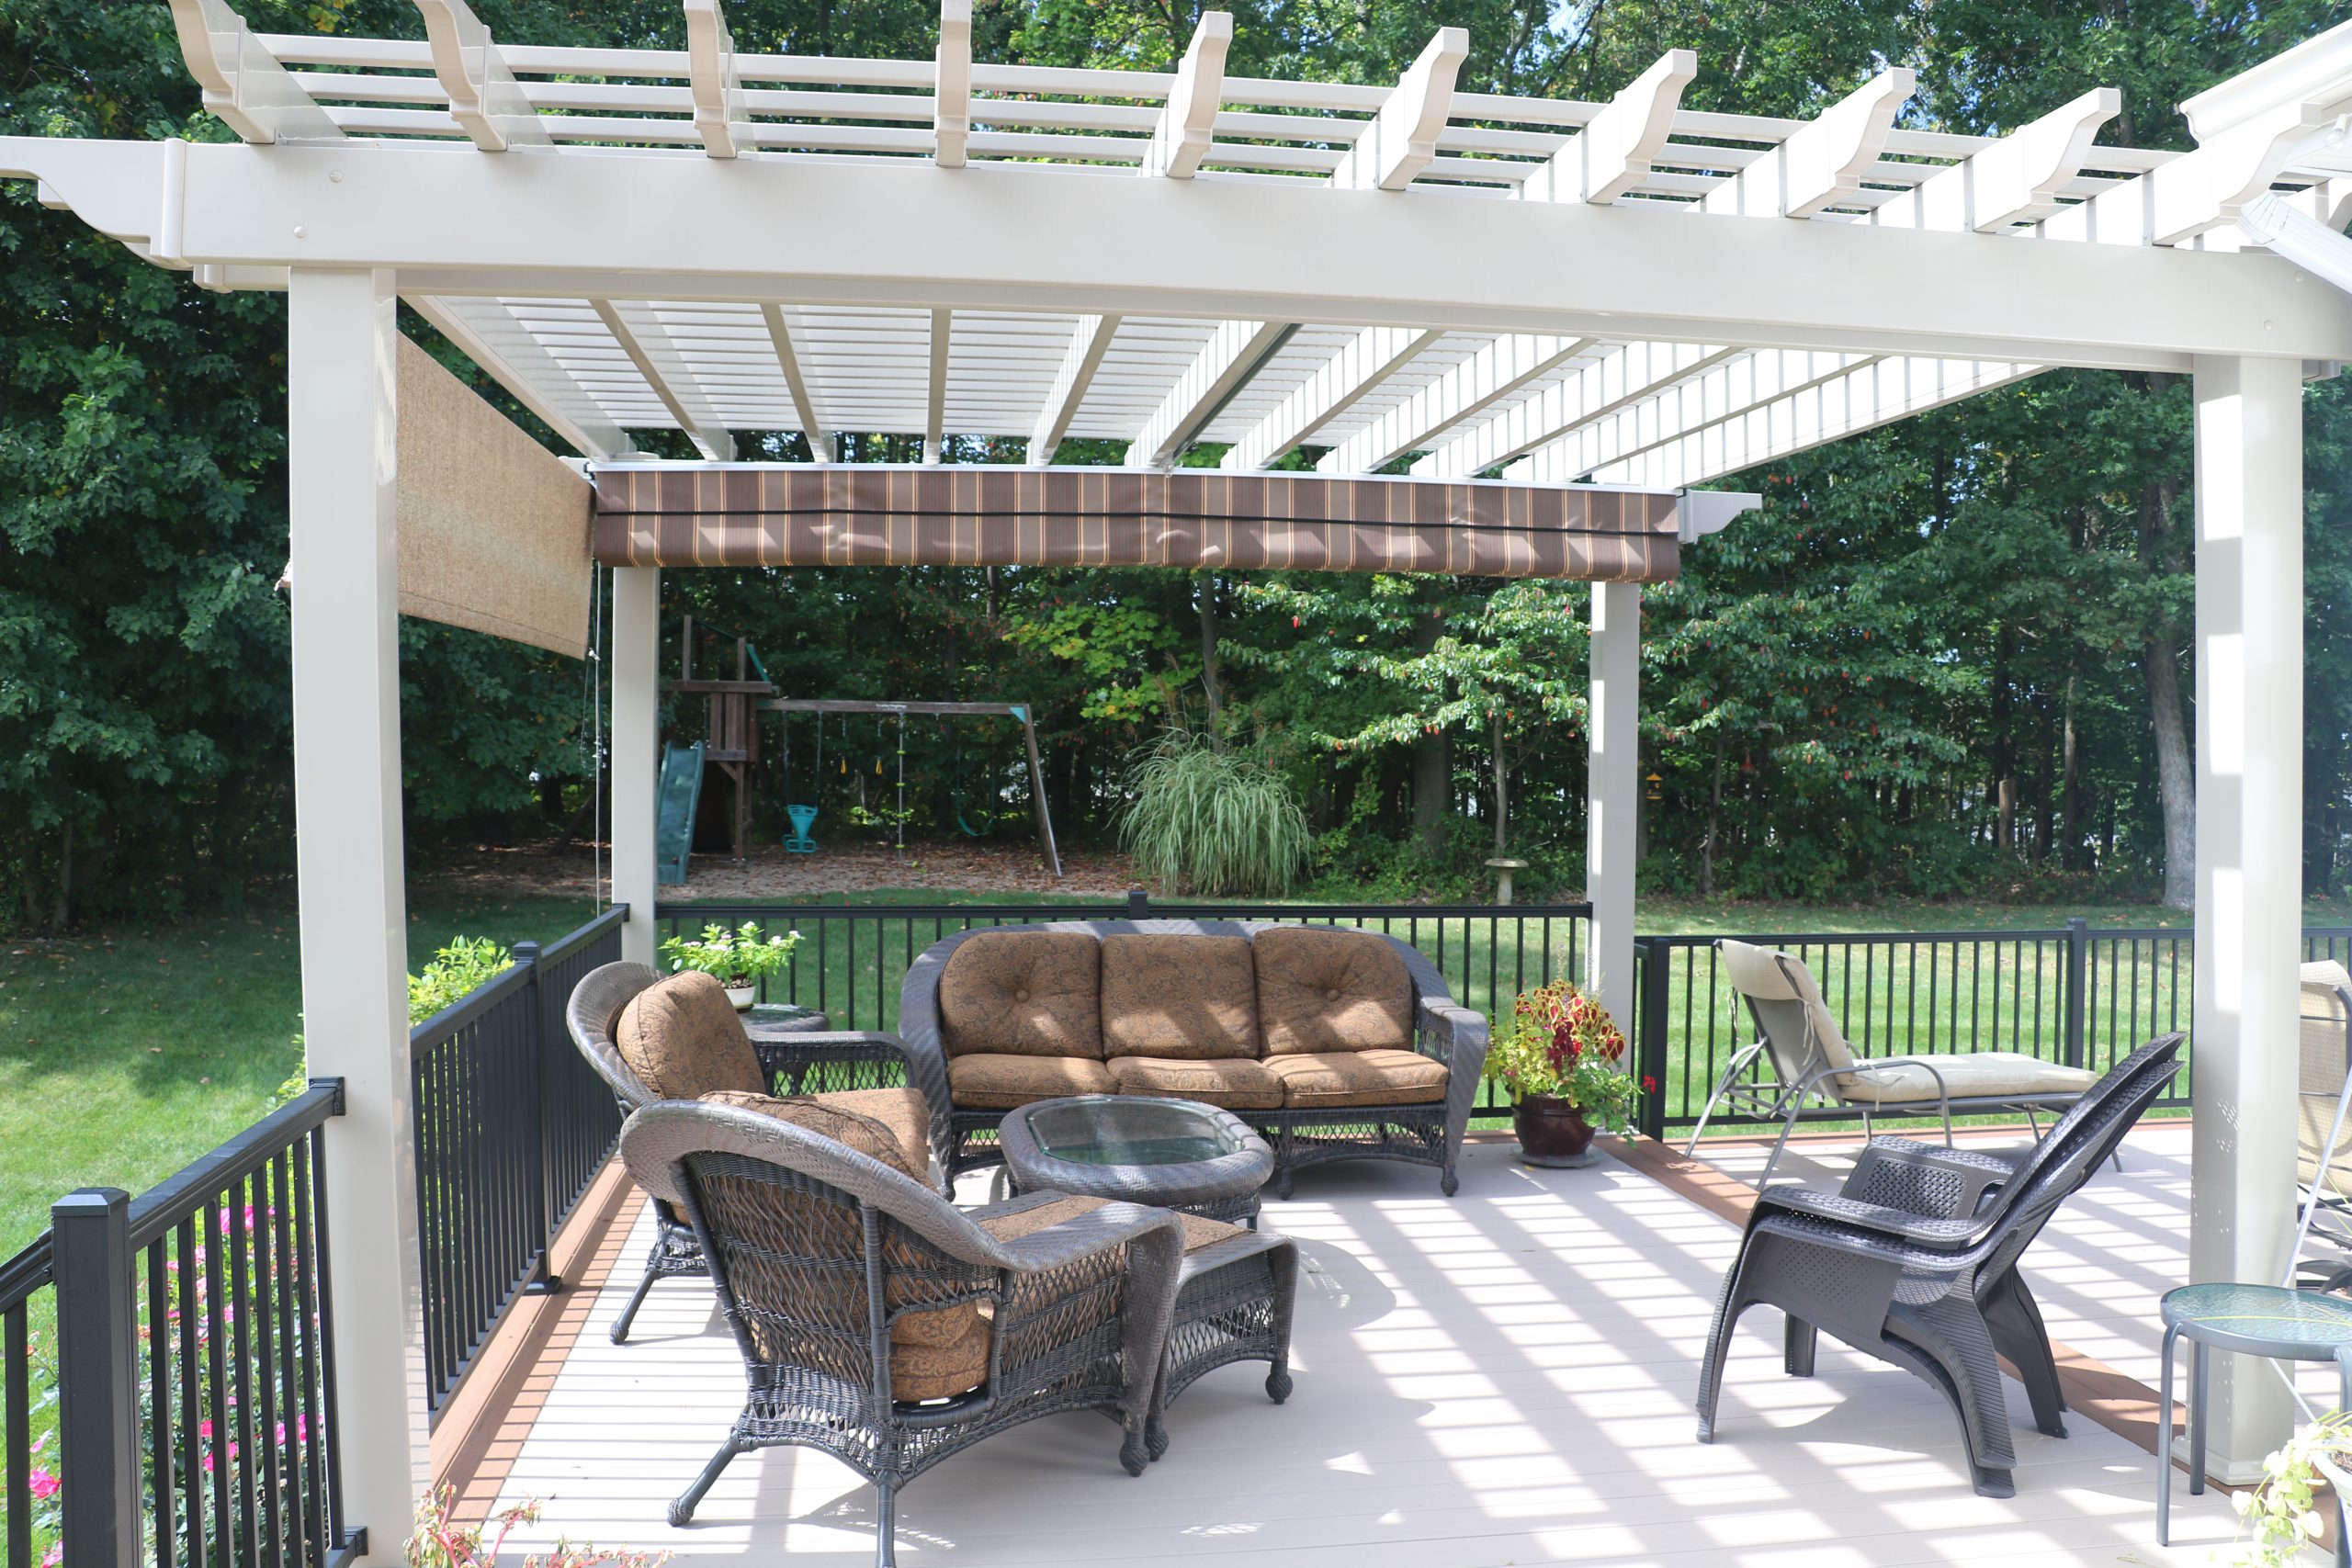 How to build a deck with a pergola